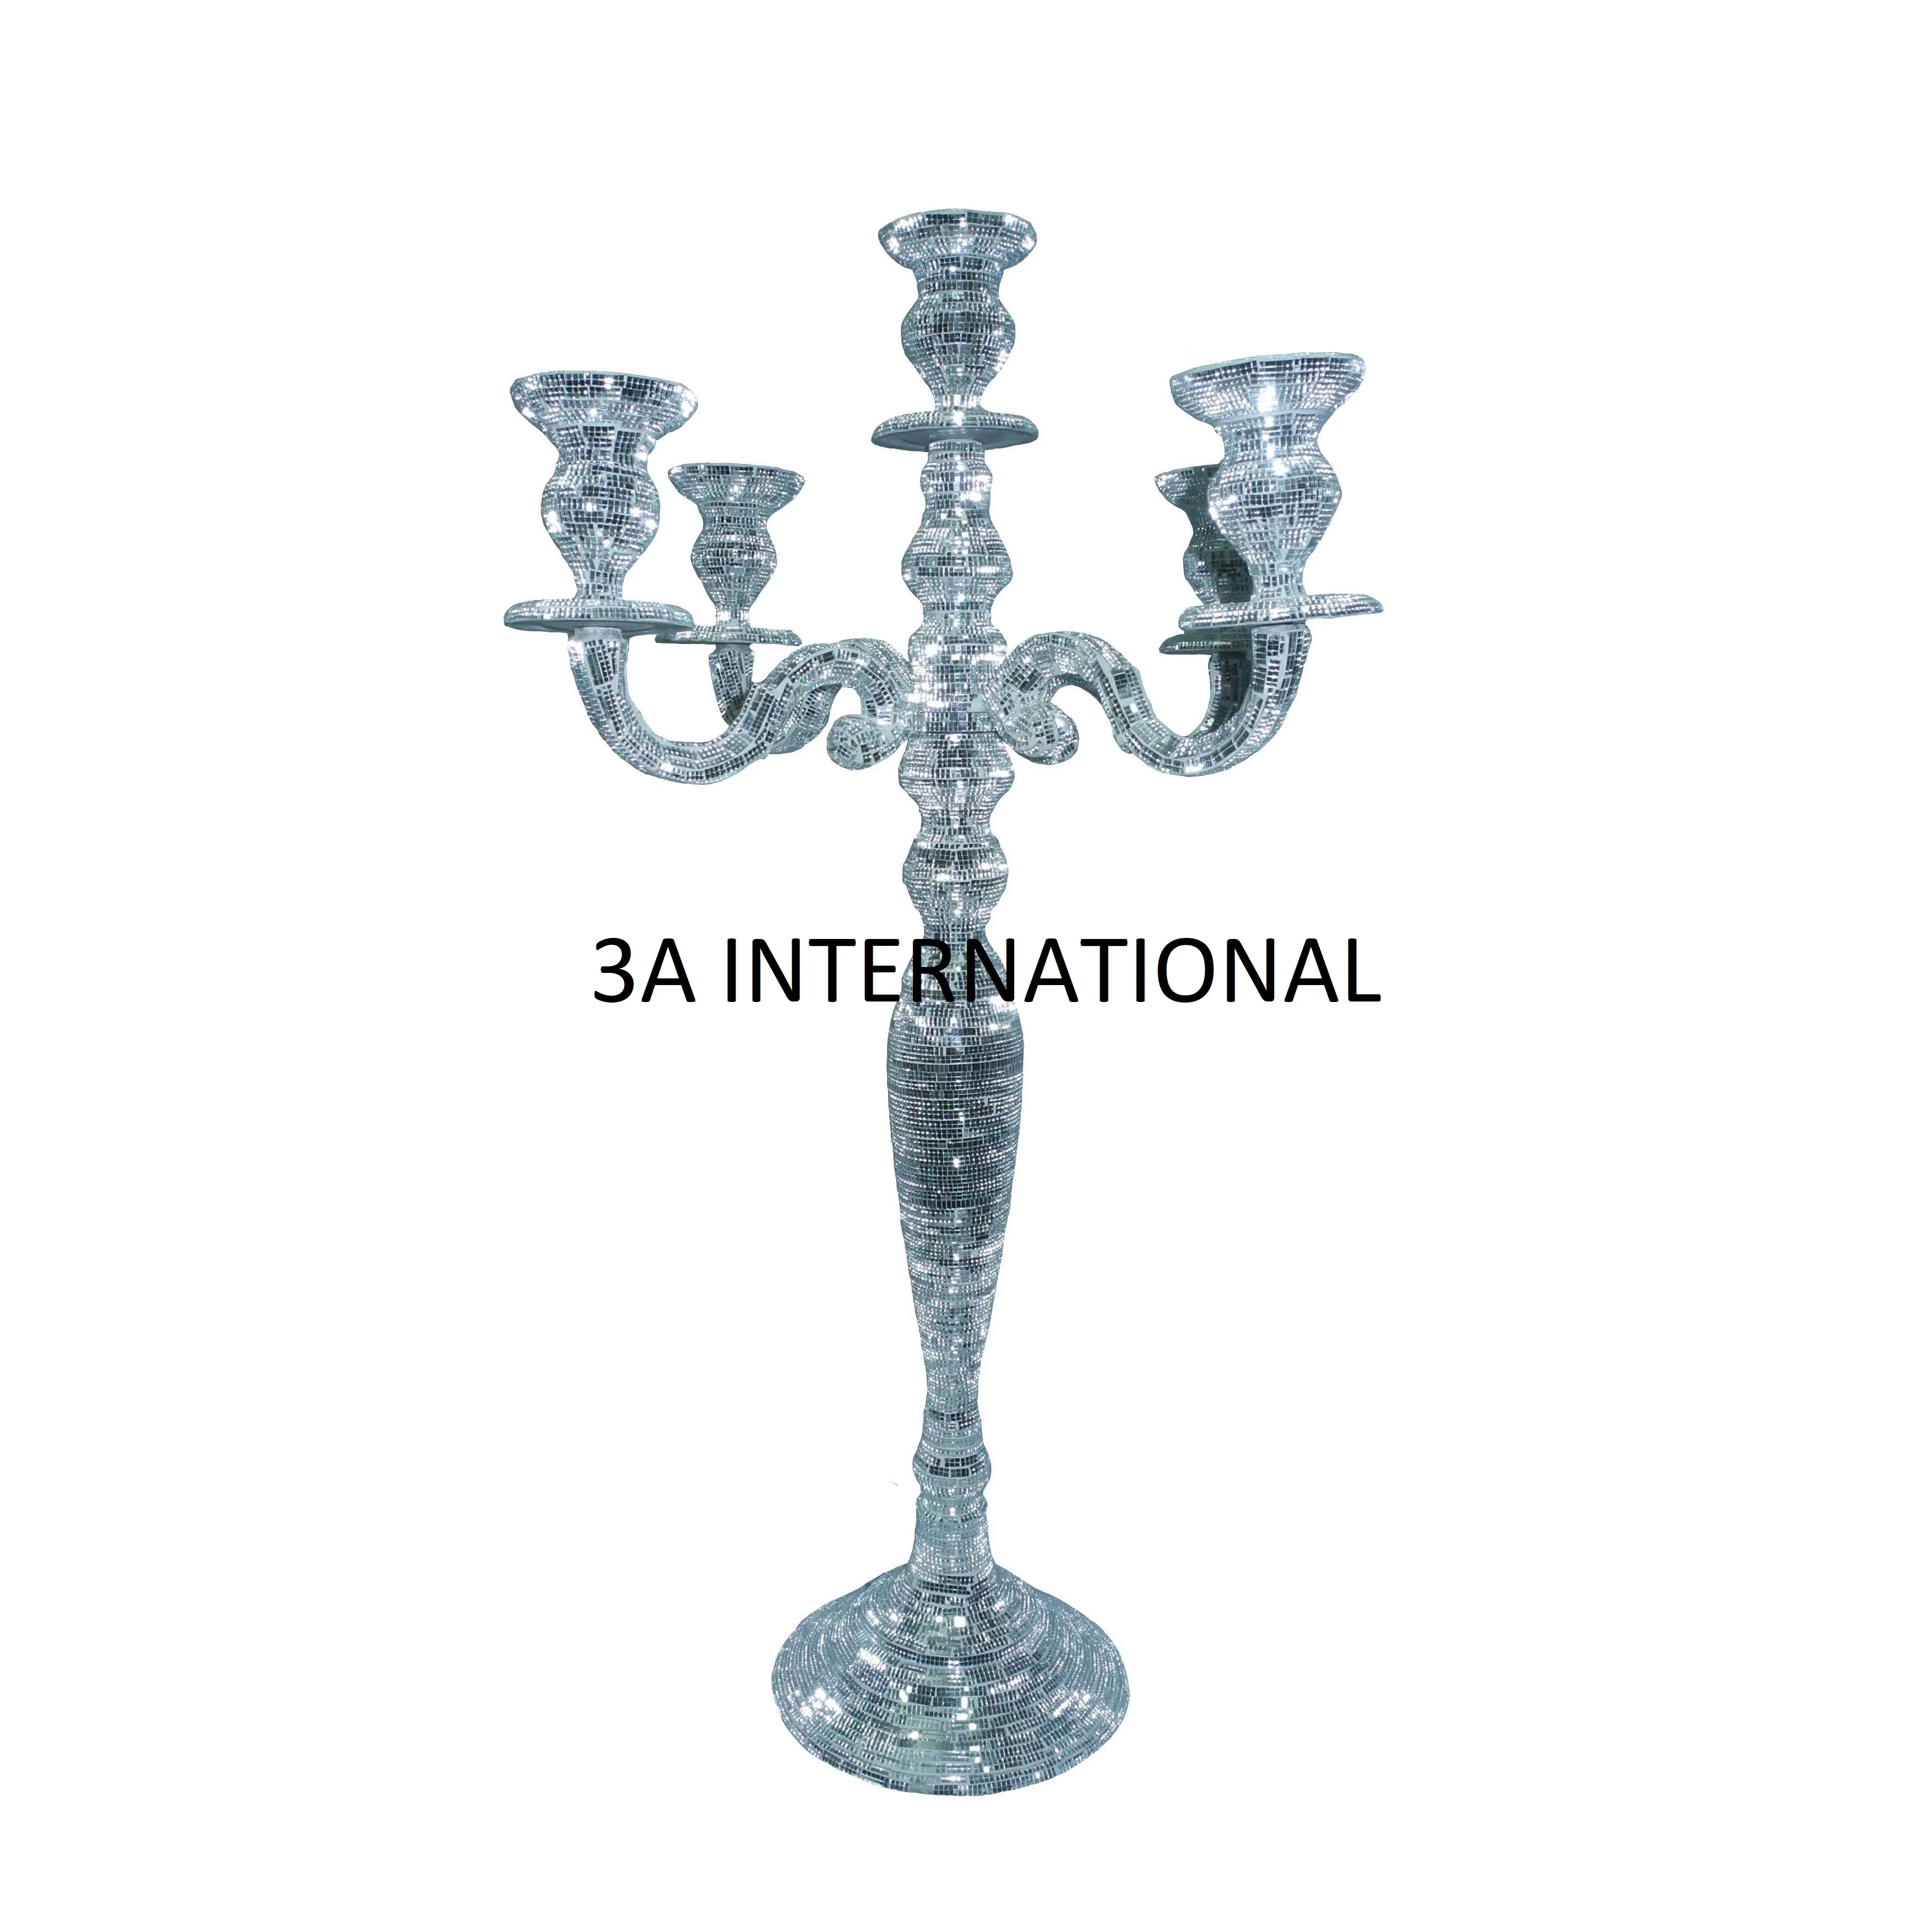 
Metal silver Candlestick candle stand crystal candelabra centerpieces wedding decoration 